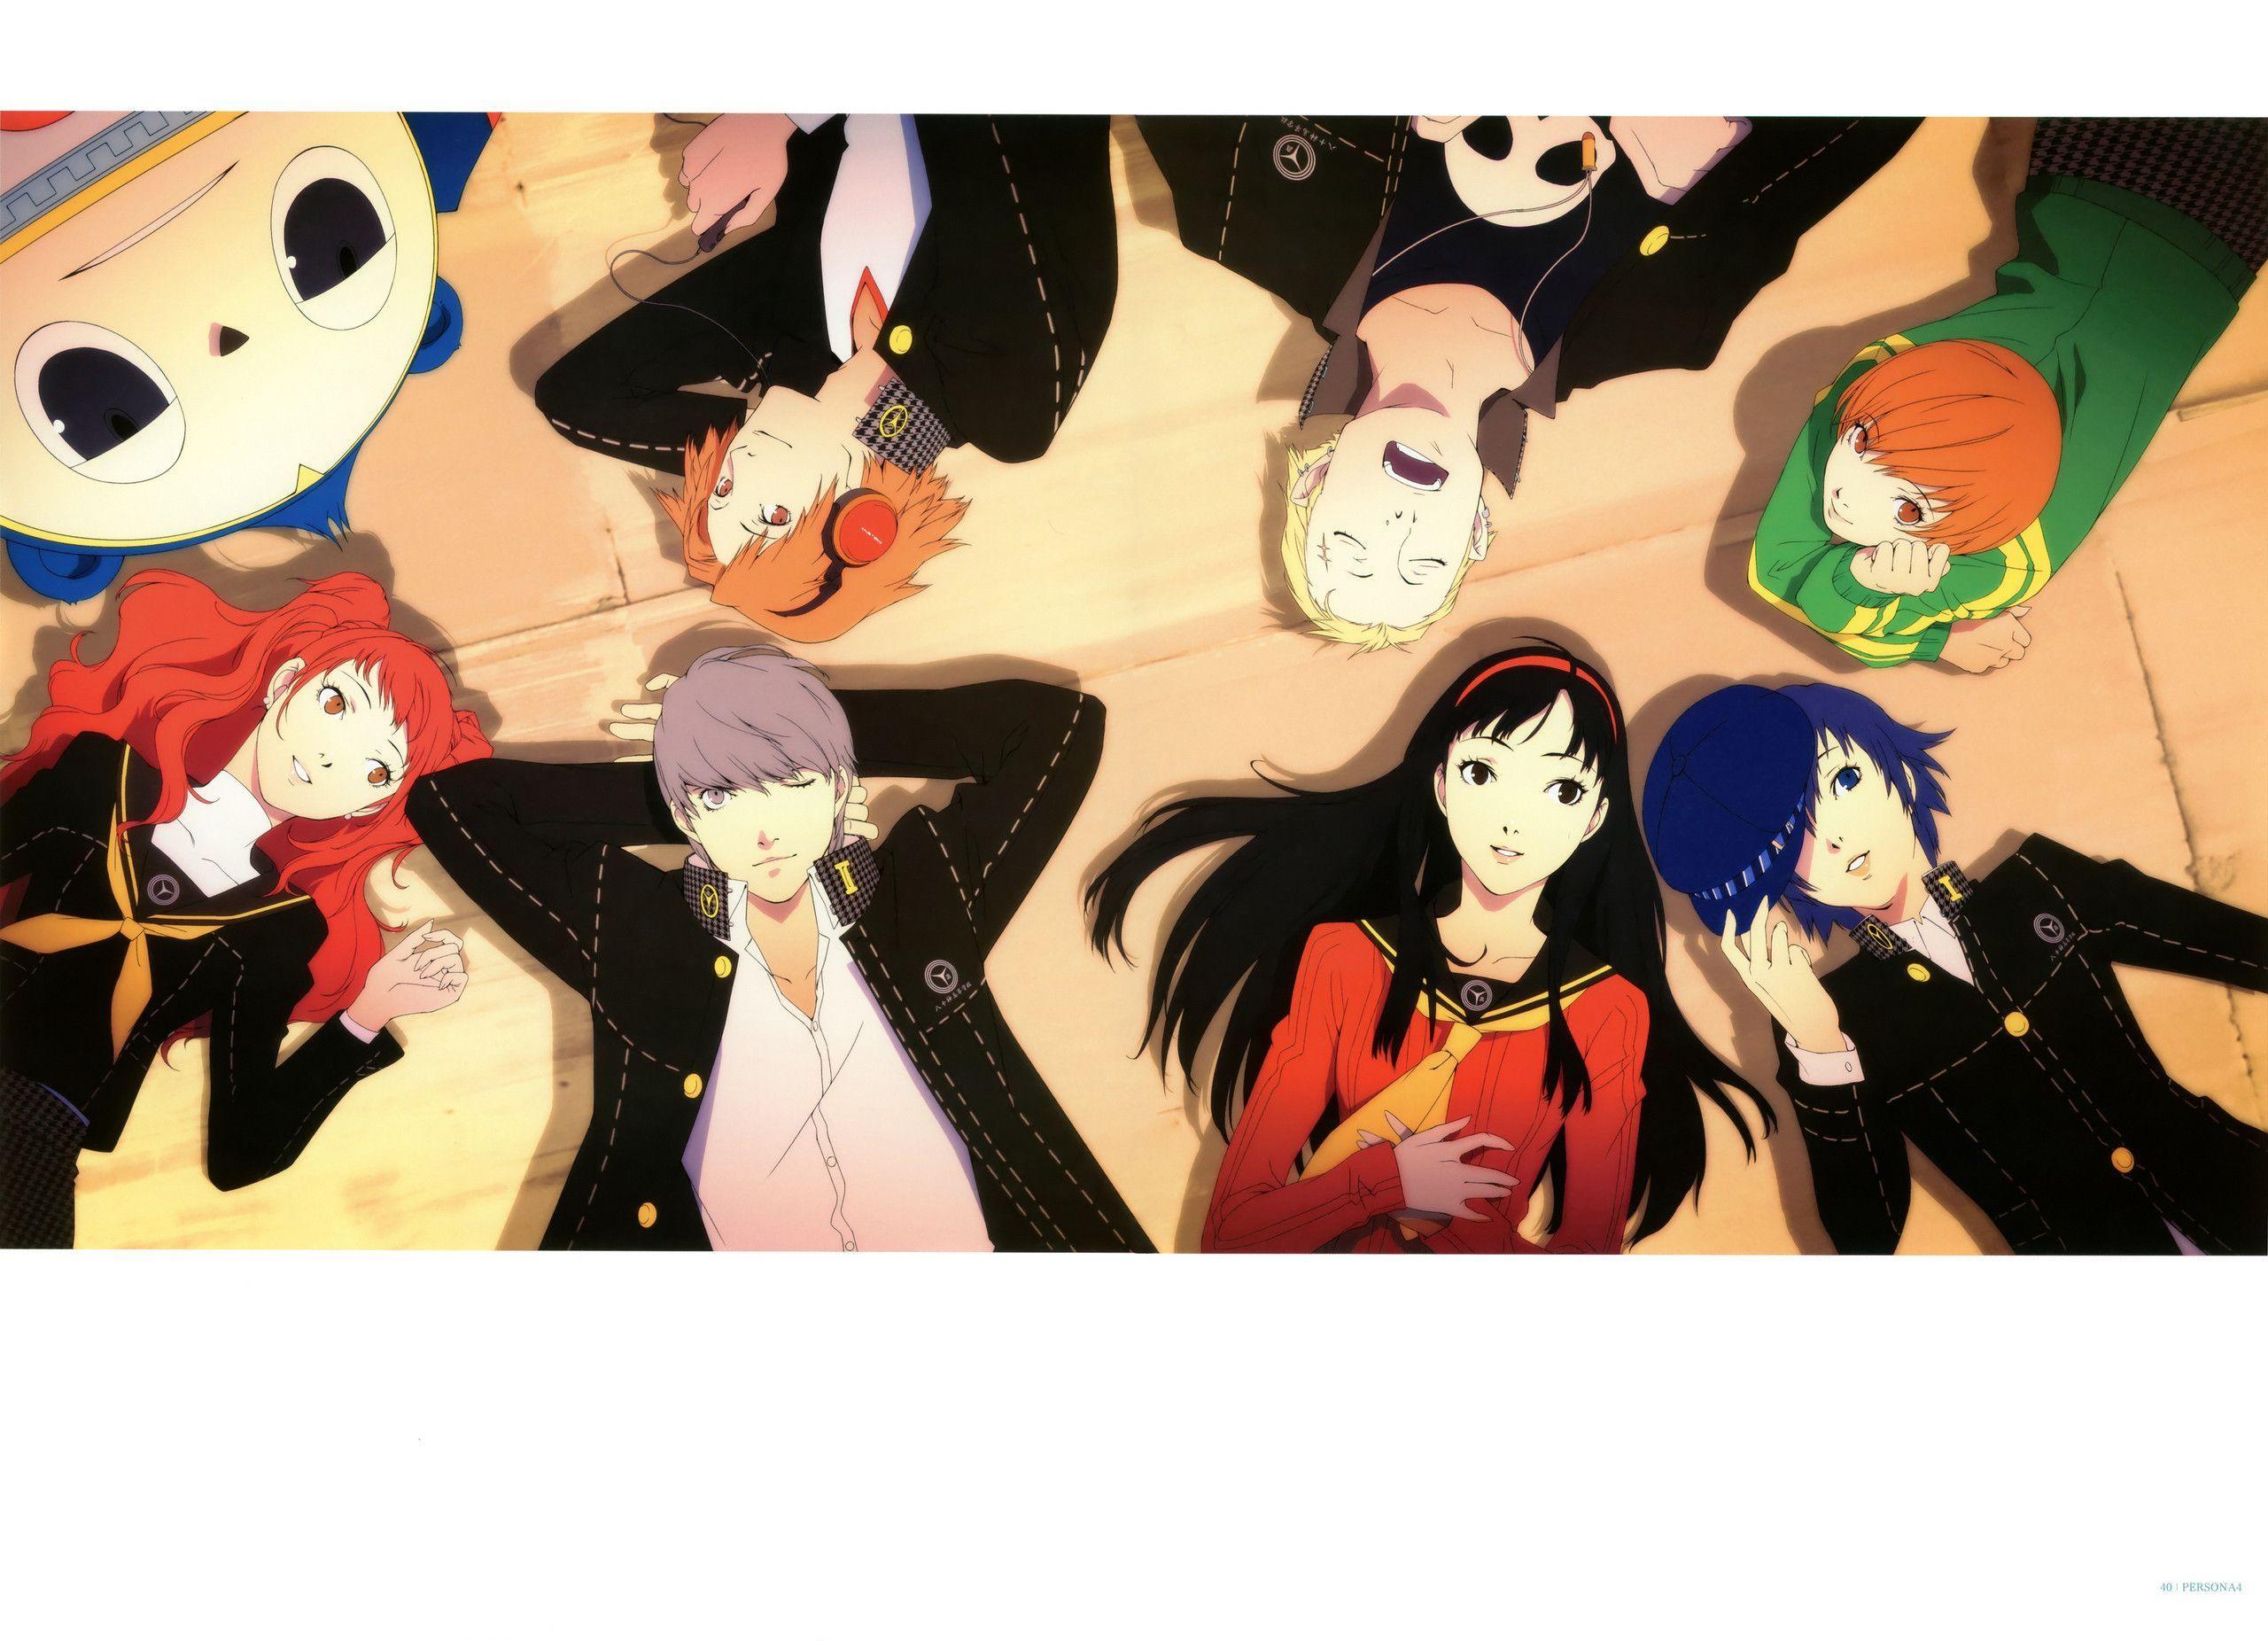 I Just Put The Wallpaper I Have :p 4 The Anime The